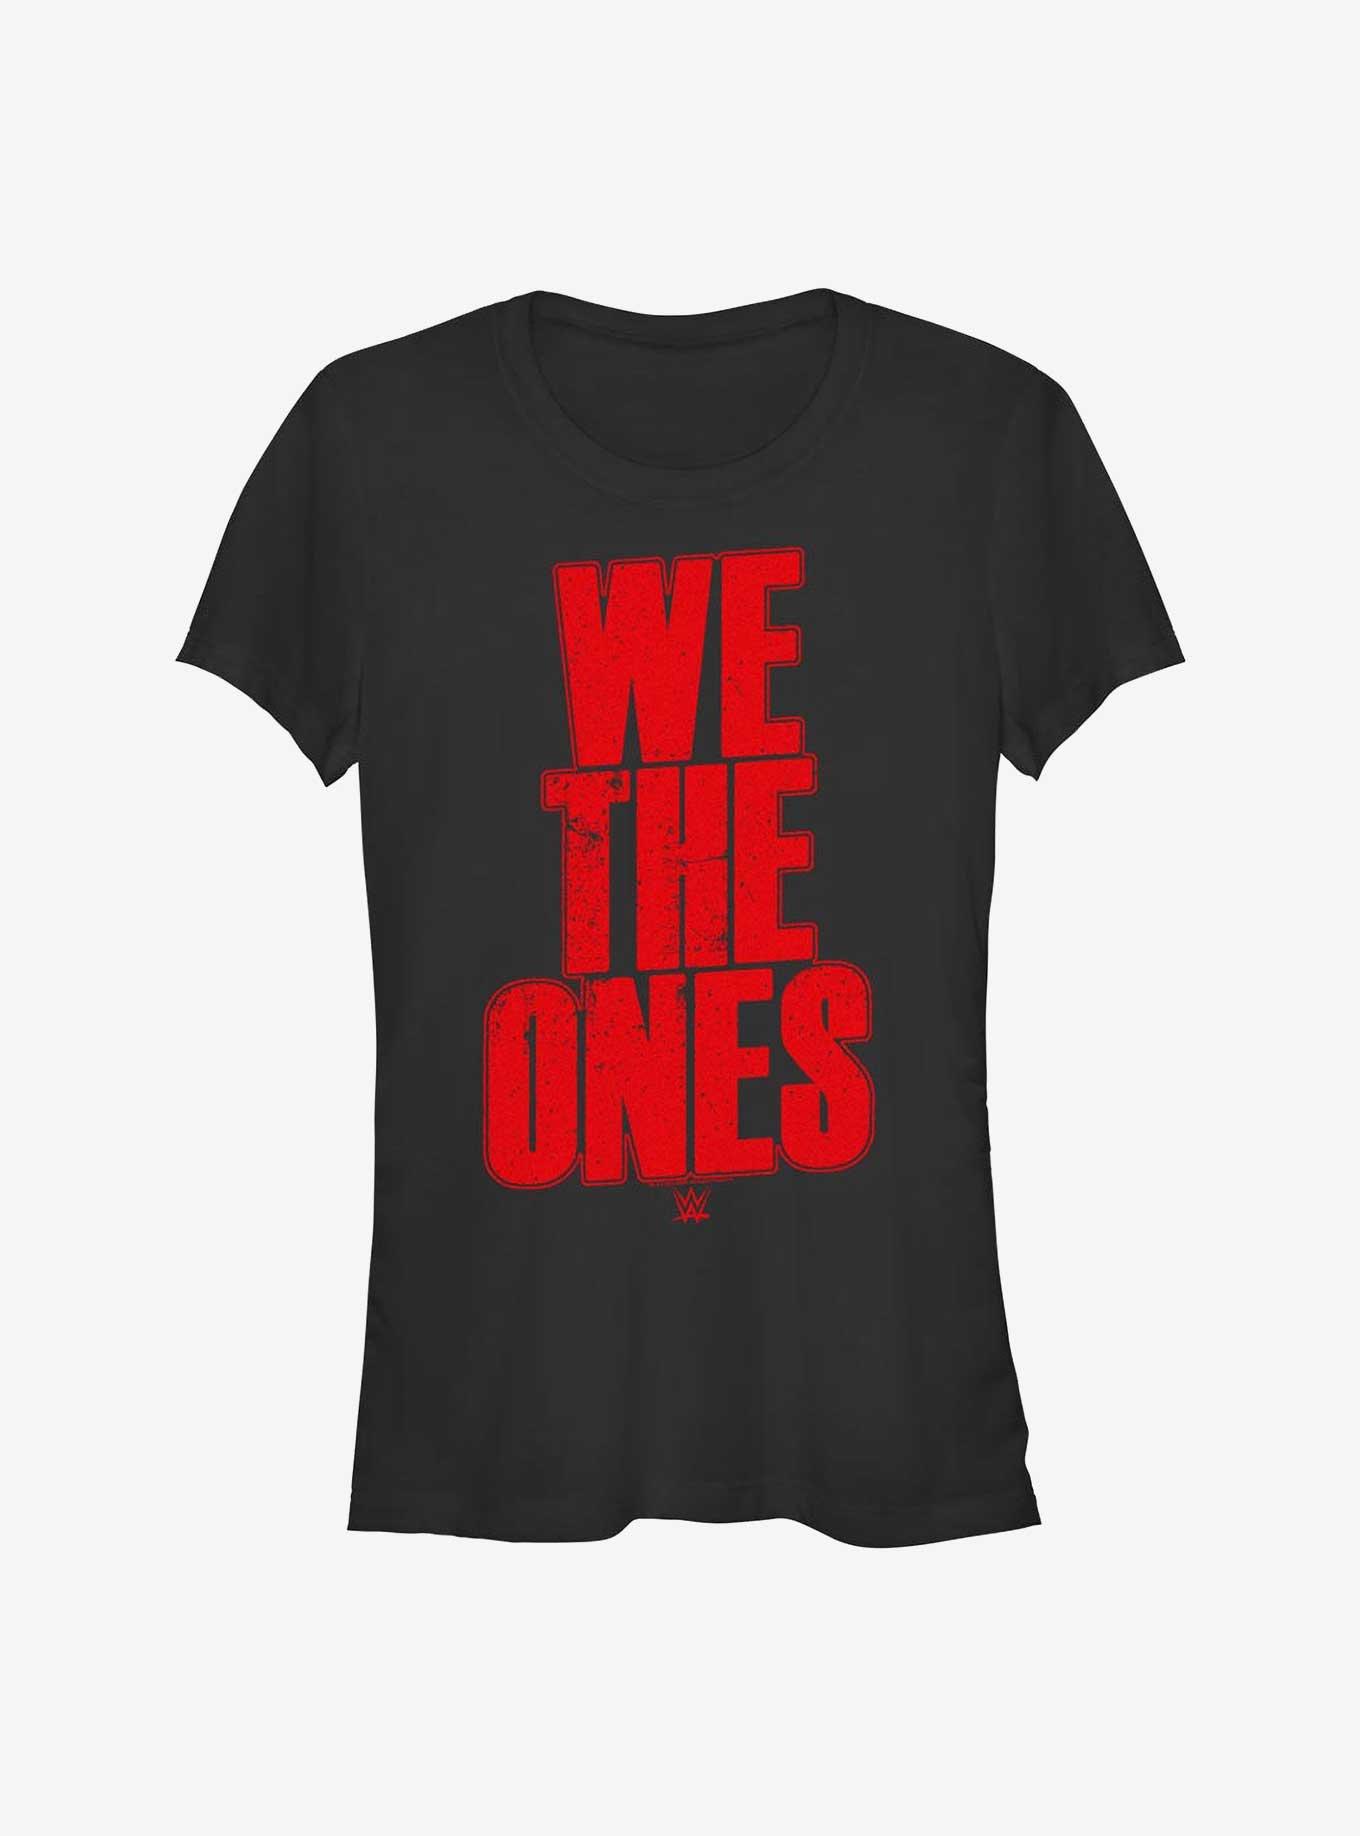 WWE The Usos We Ones Girls T-Shirt